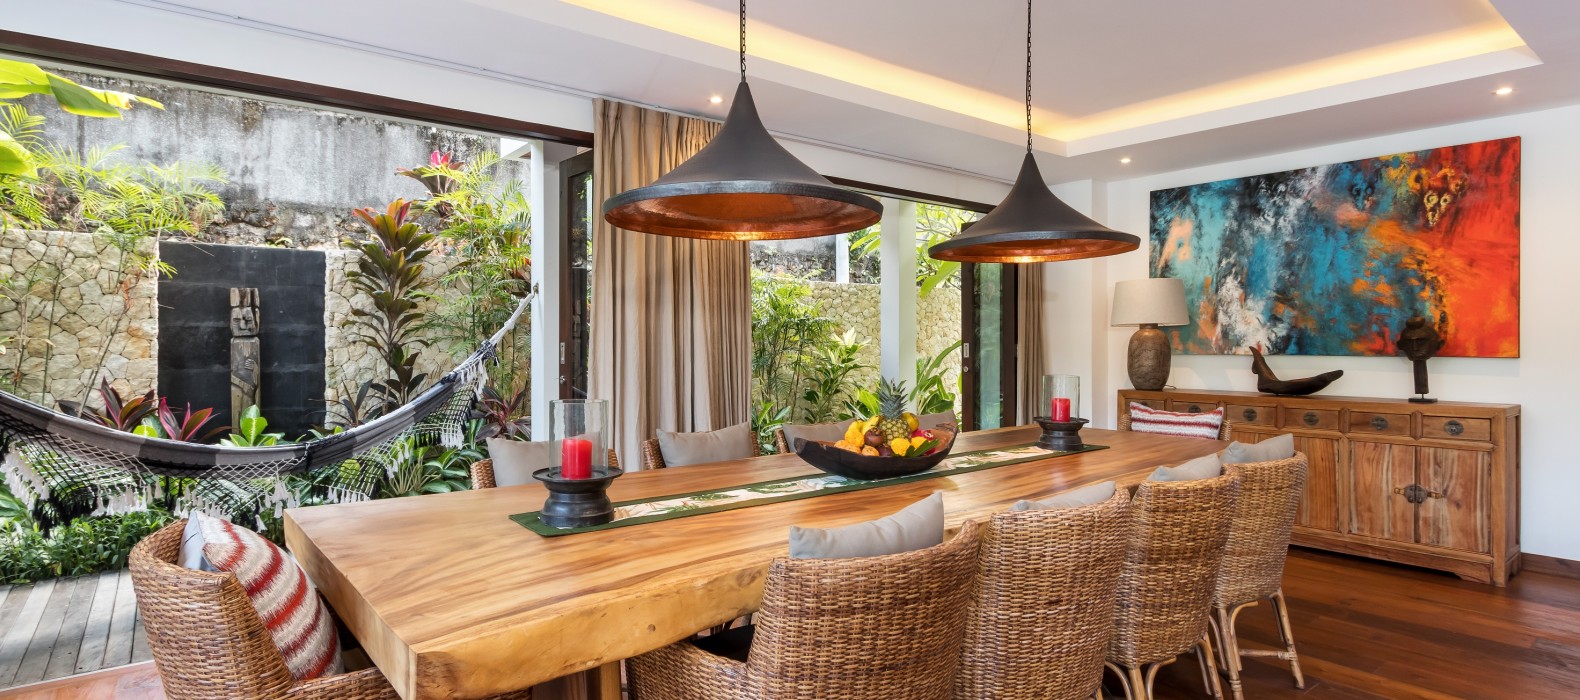 Dining table view of Villa Sundance in Bali